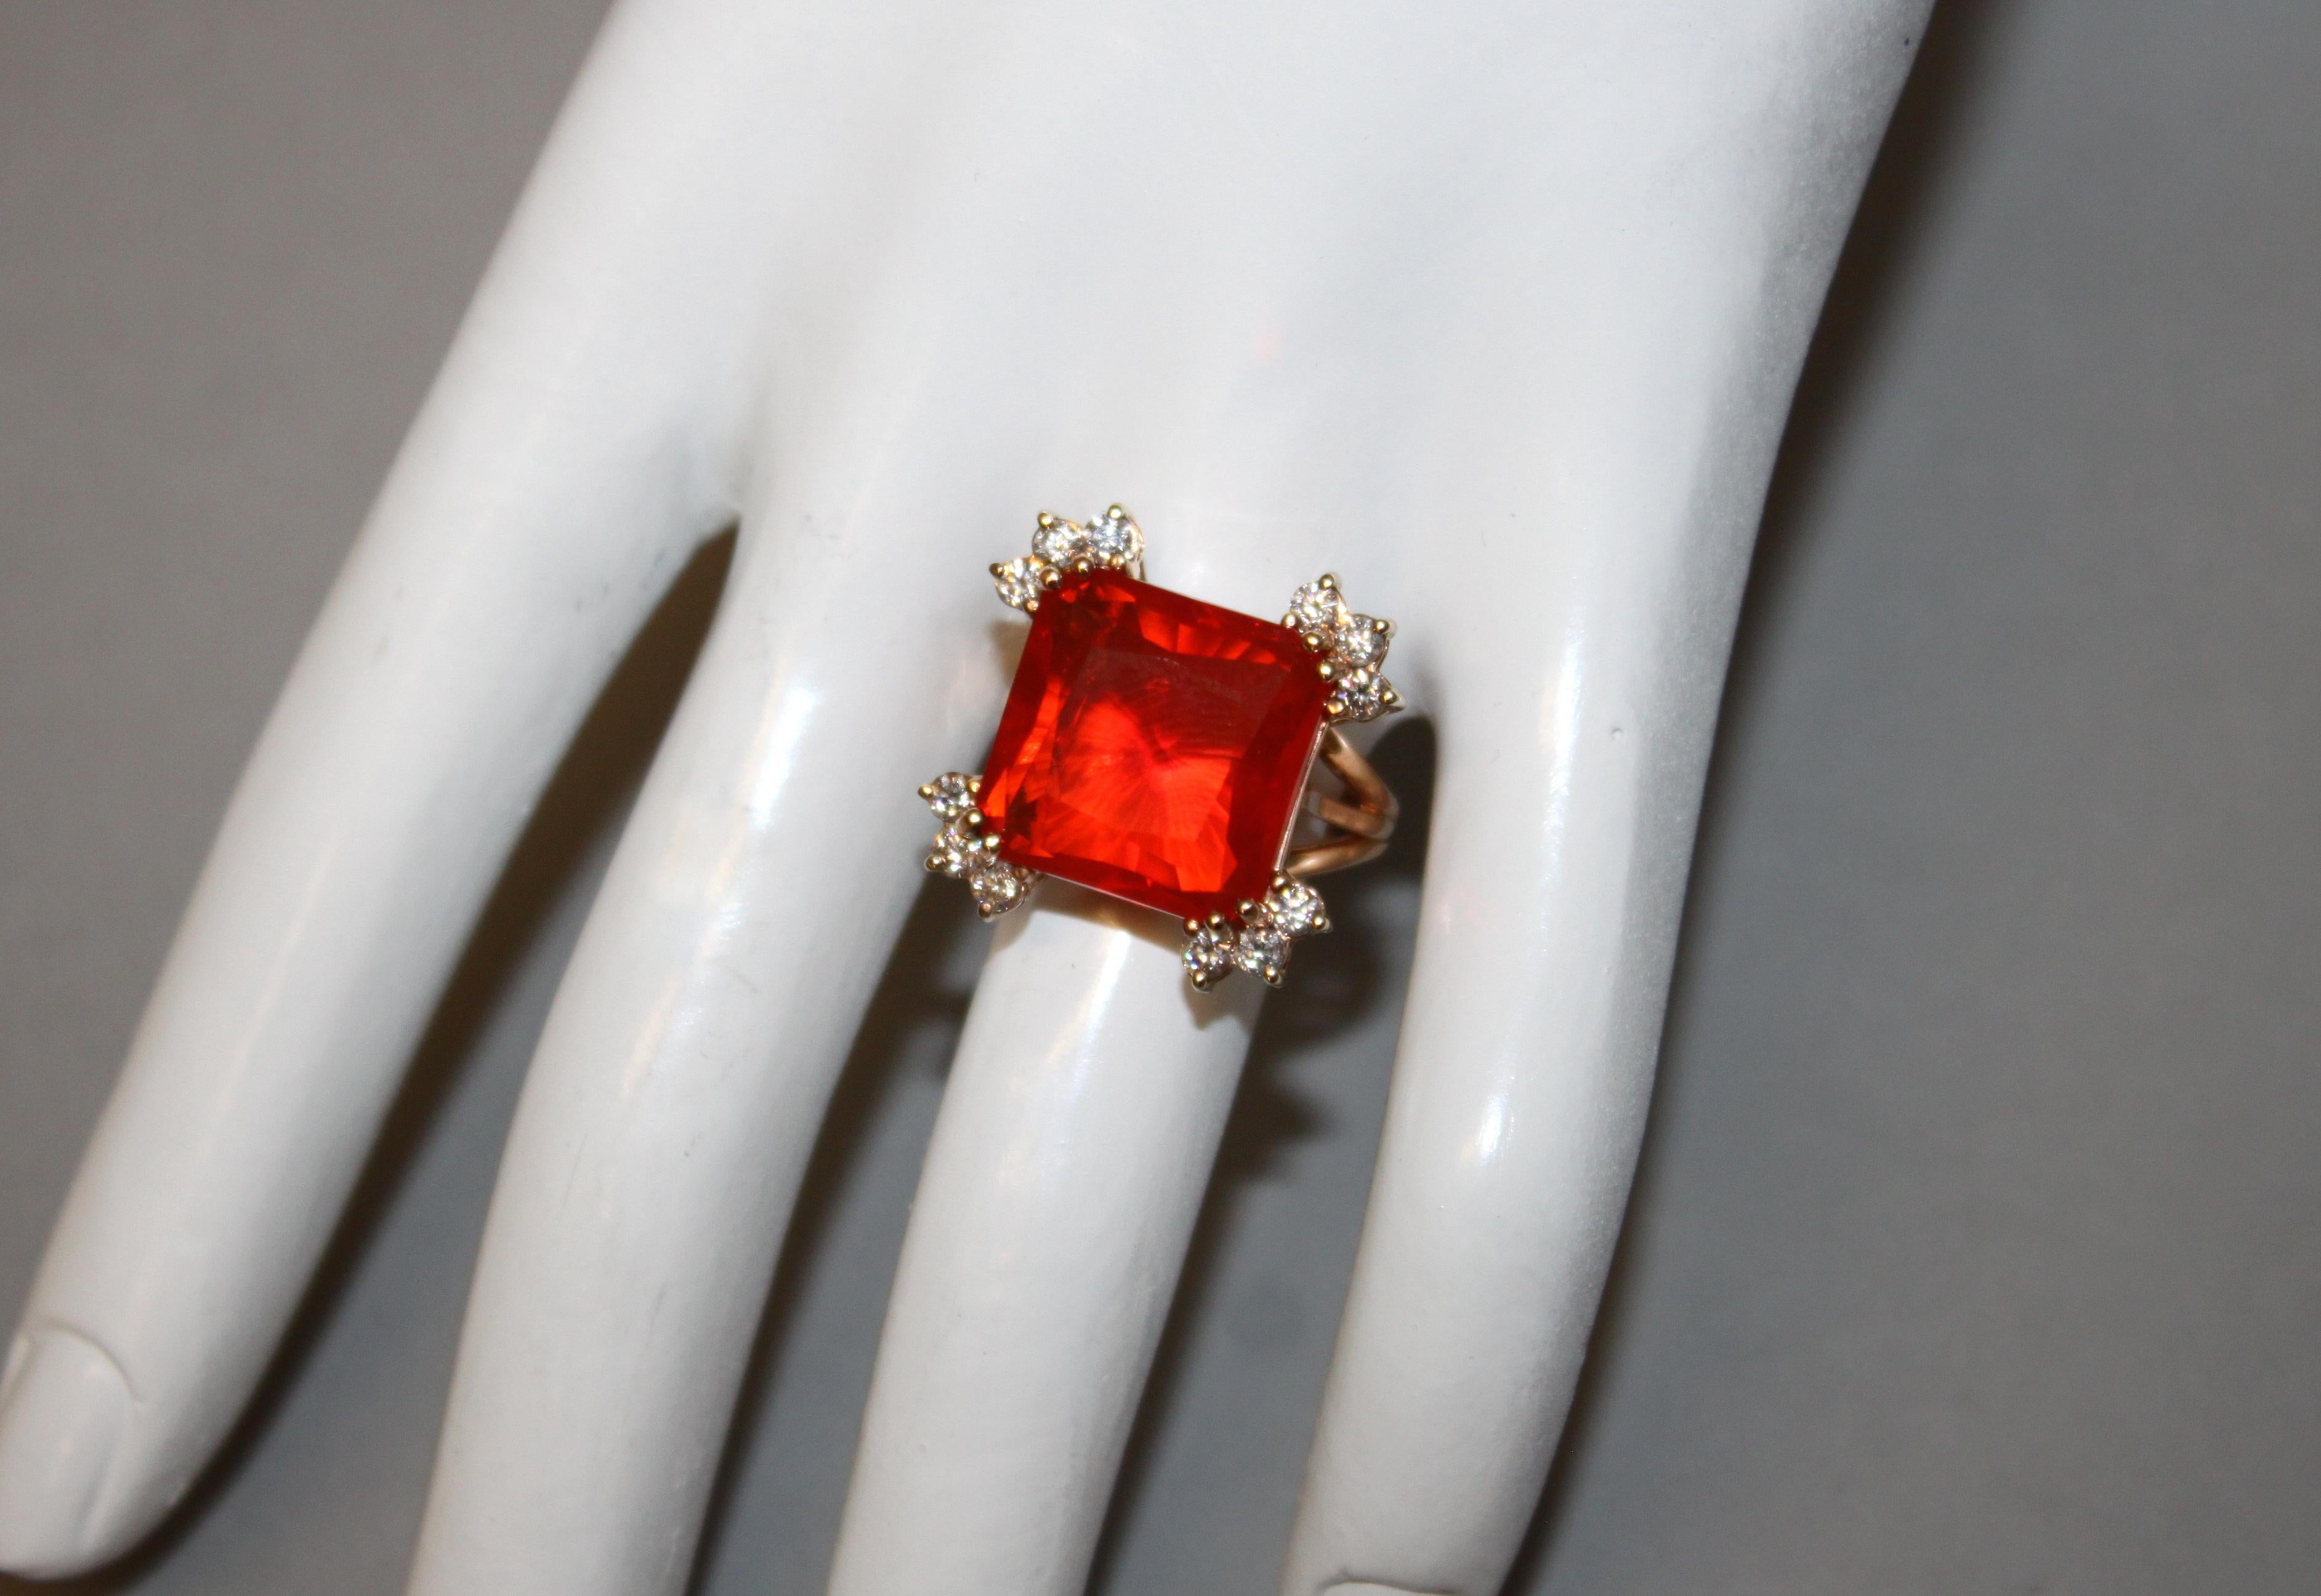 Brilliant Cut 18 Karat Yellow Gold Ring with Natural Fire Opal 10.18 Carat and Diamonds, Italy